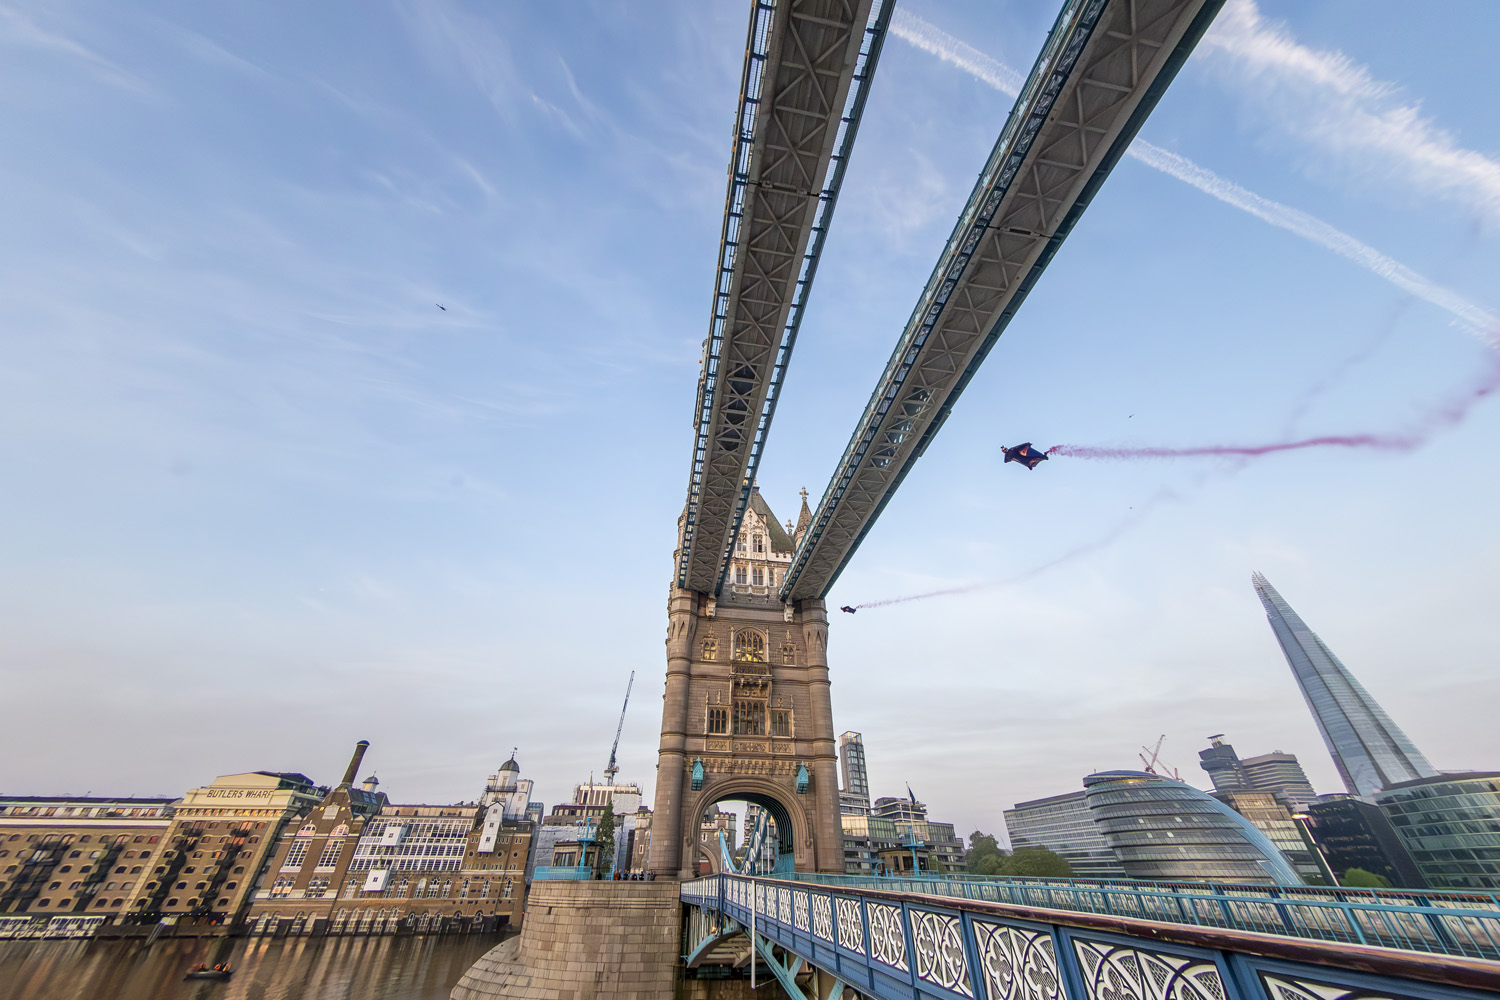 Marco Waltenspiel and Marco Fuerst of Austria fly through Tower Bridge in London, Great Britain on May 12, 2024.